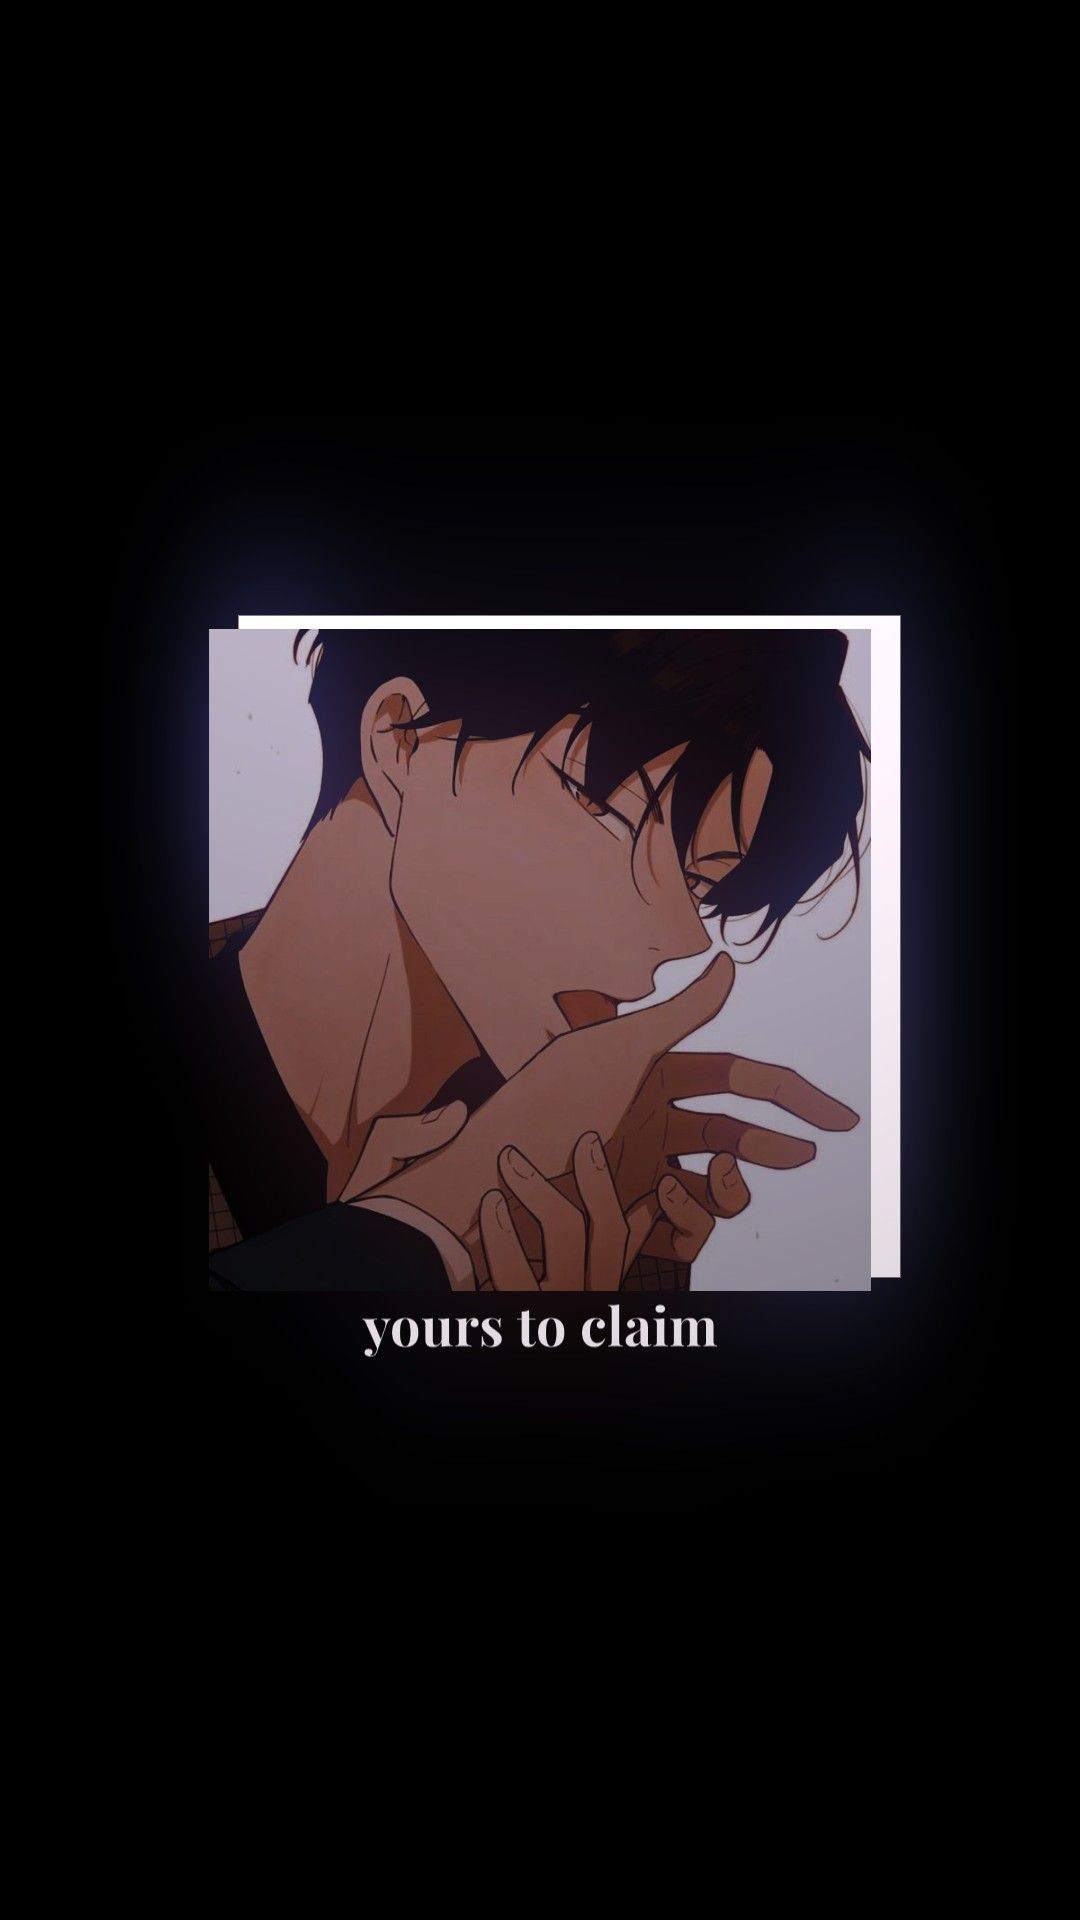 Yours to claim go yahwi wallpaper. Aesthetic anime, Anime wallpaper, Anime wallpaper iphone